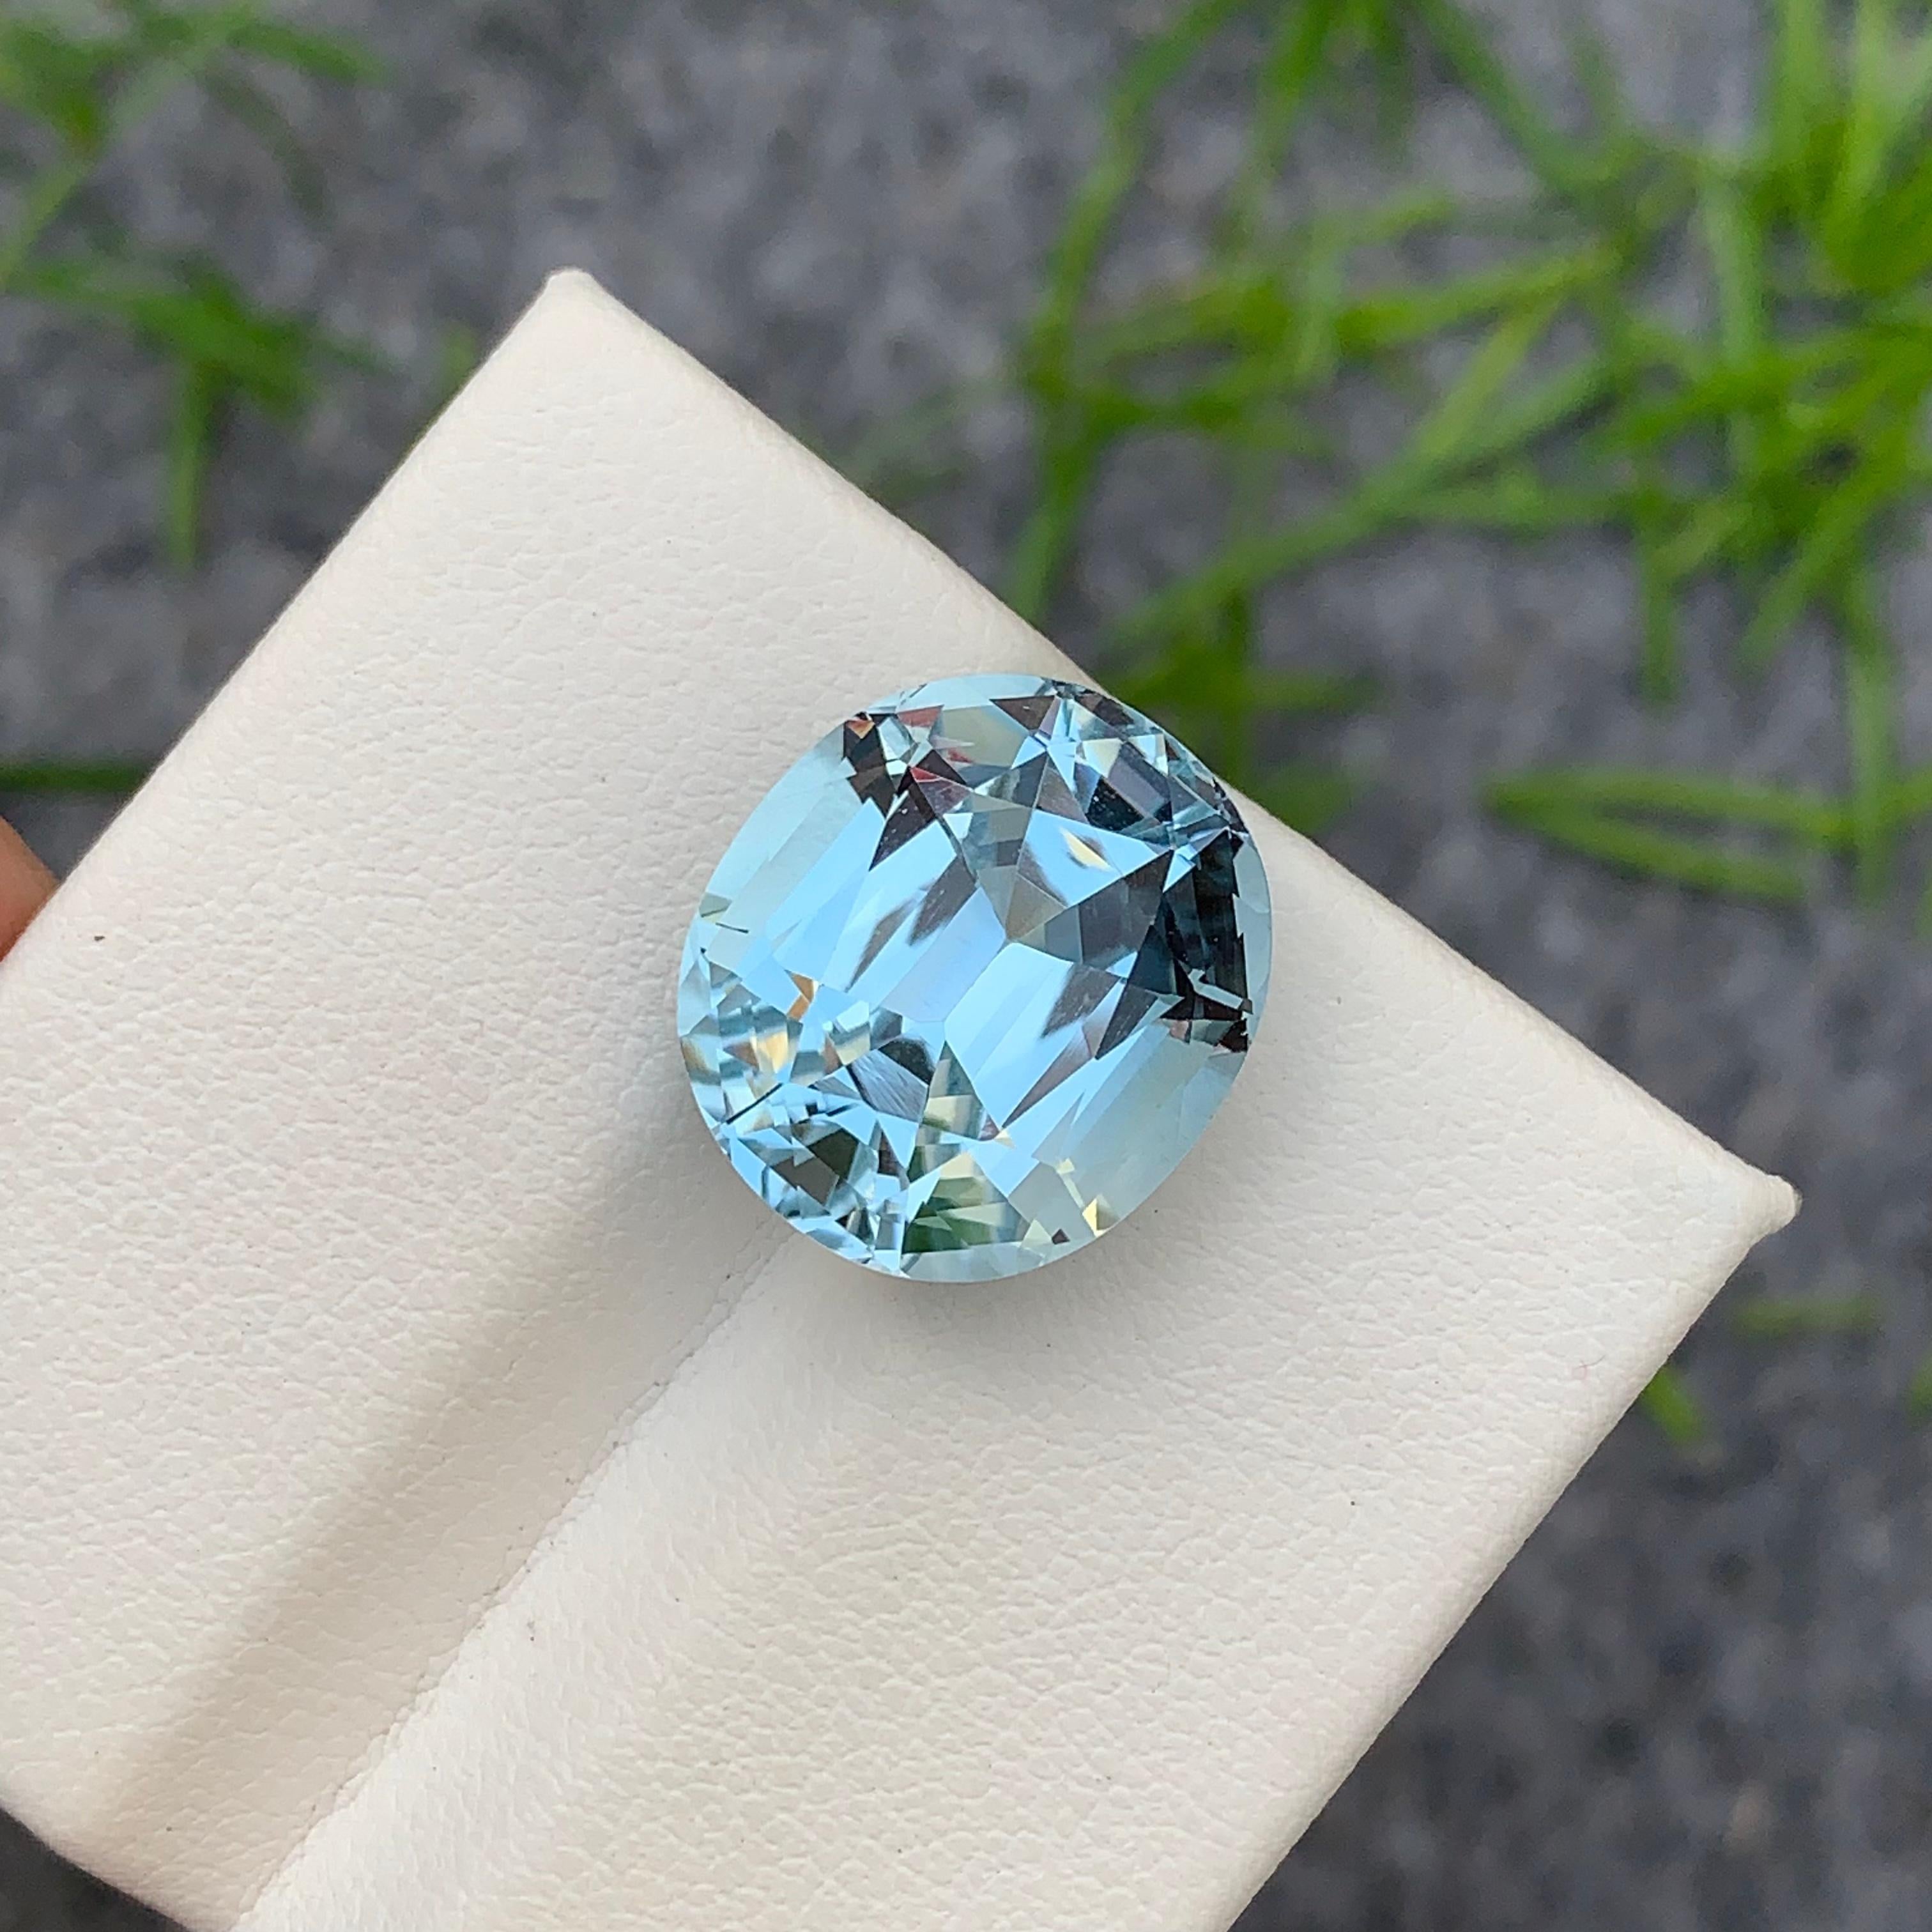 18.75 Carat Faceted Light Blue Topaz Cushion Cut Gemstone from Brazil Mine For Sale 11